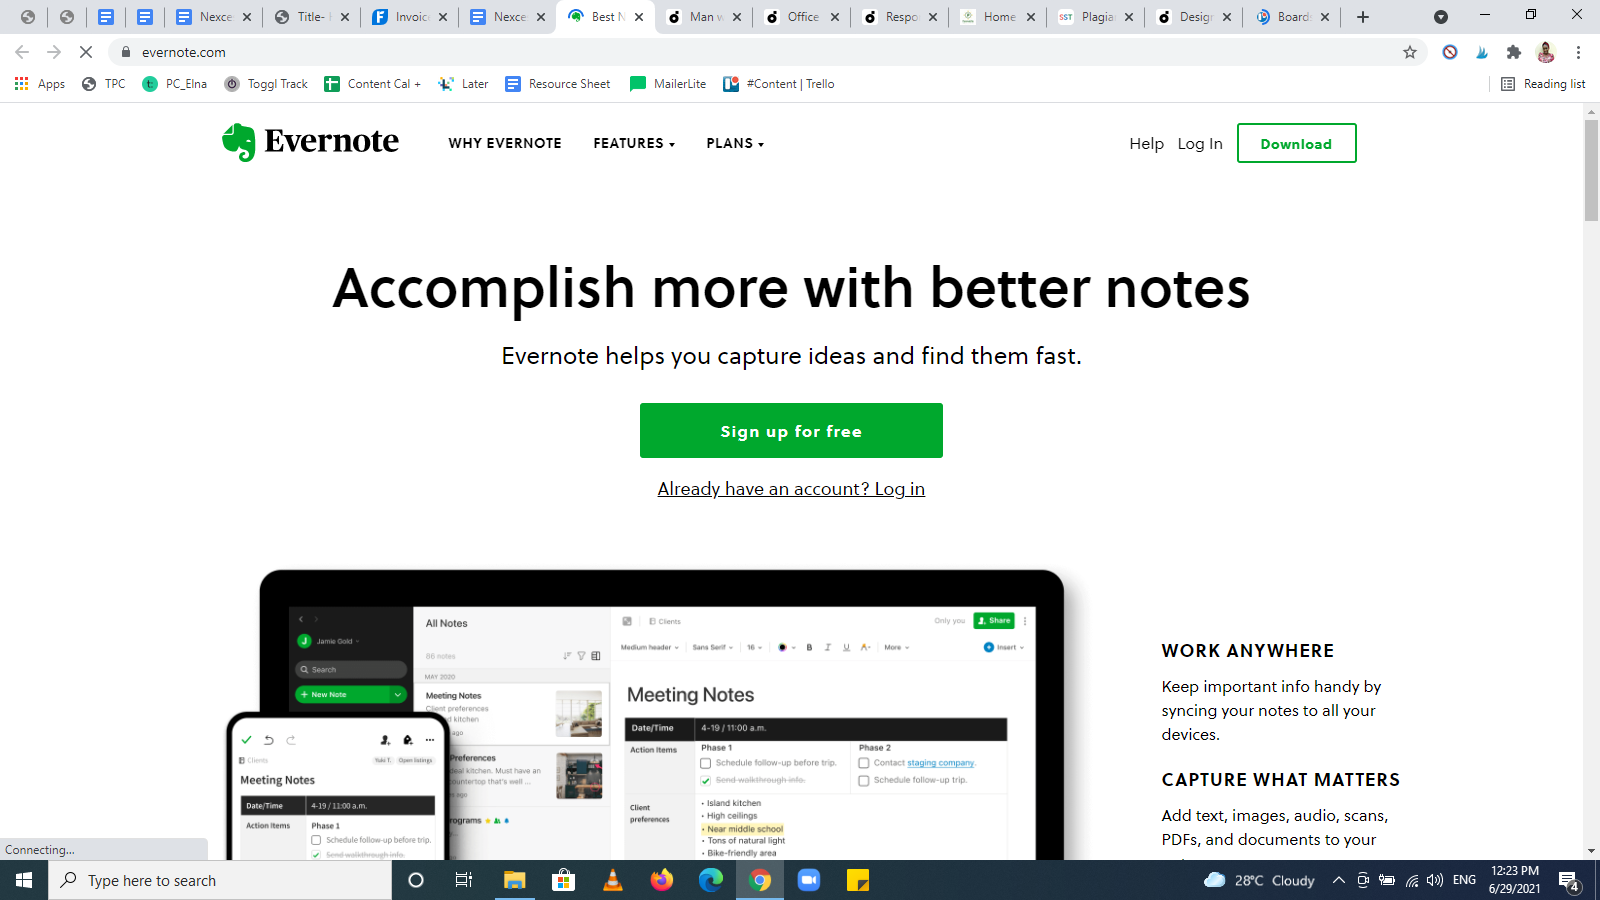 Evernote’s homepage example